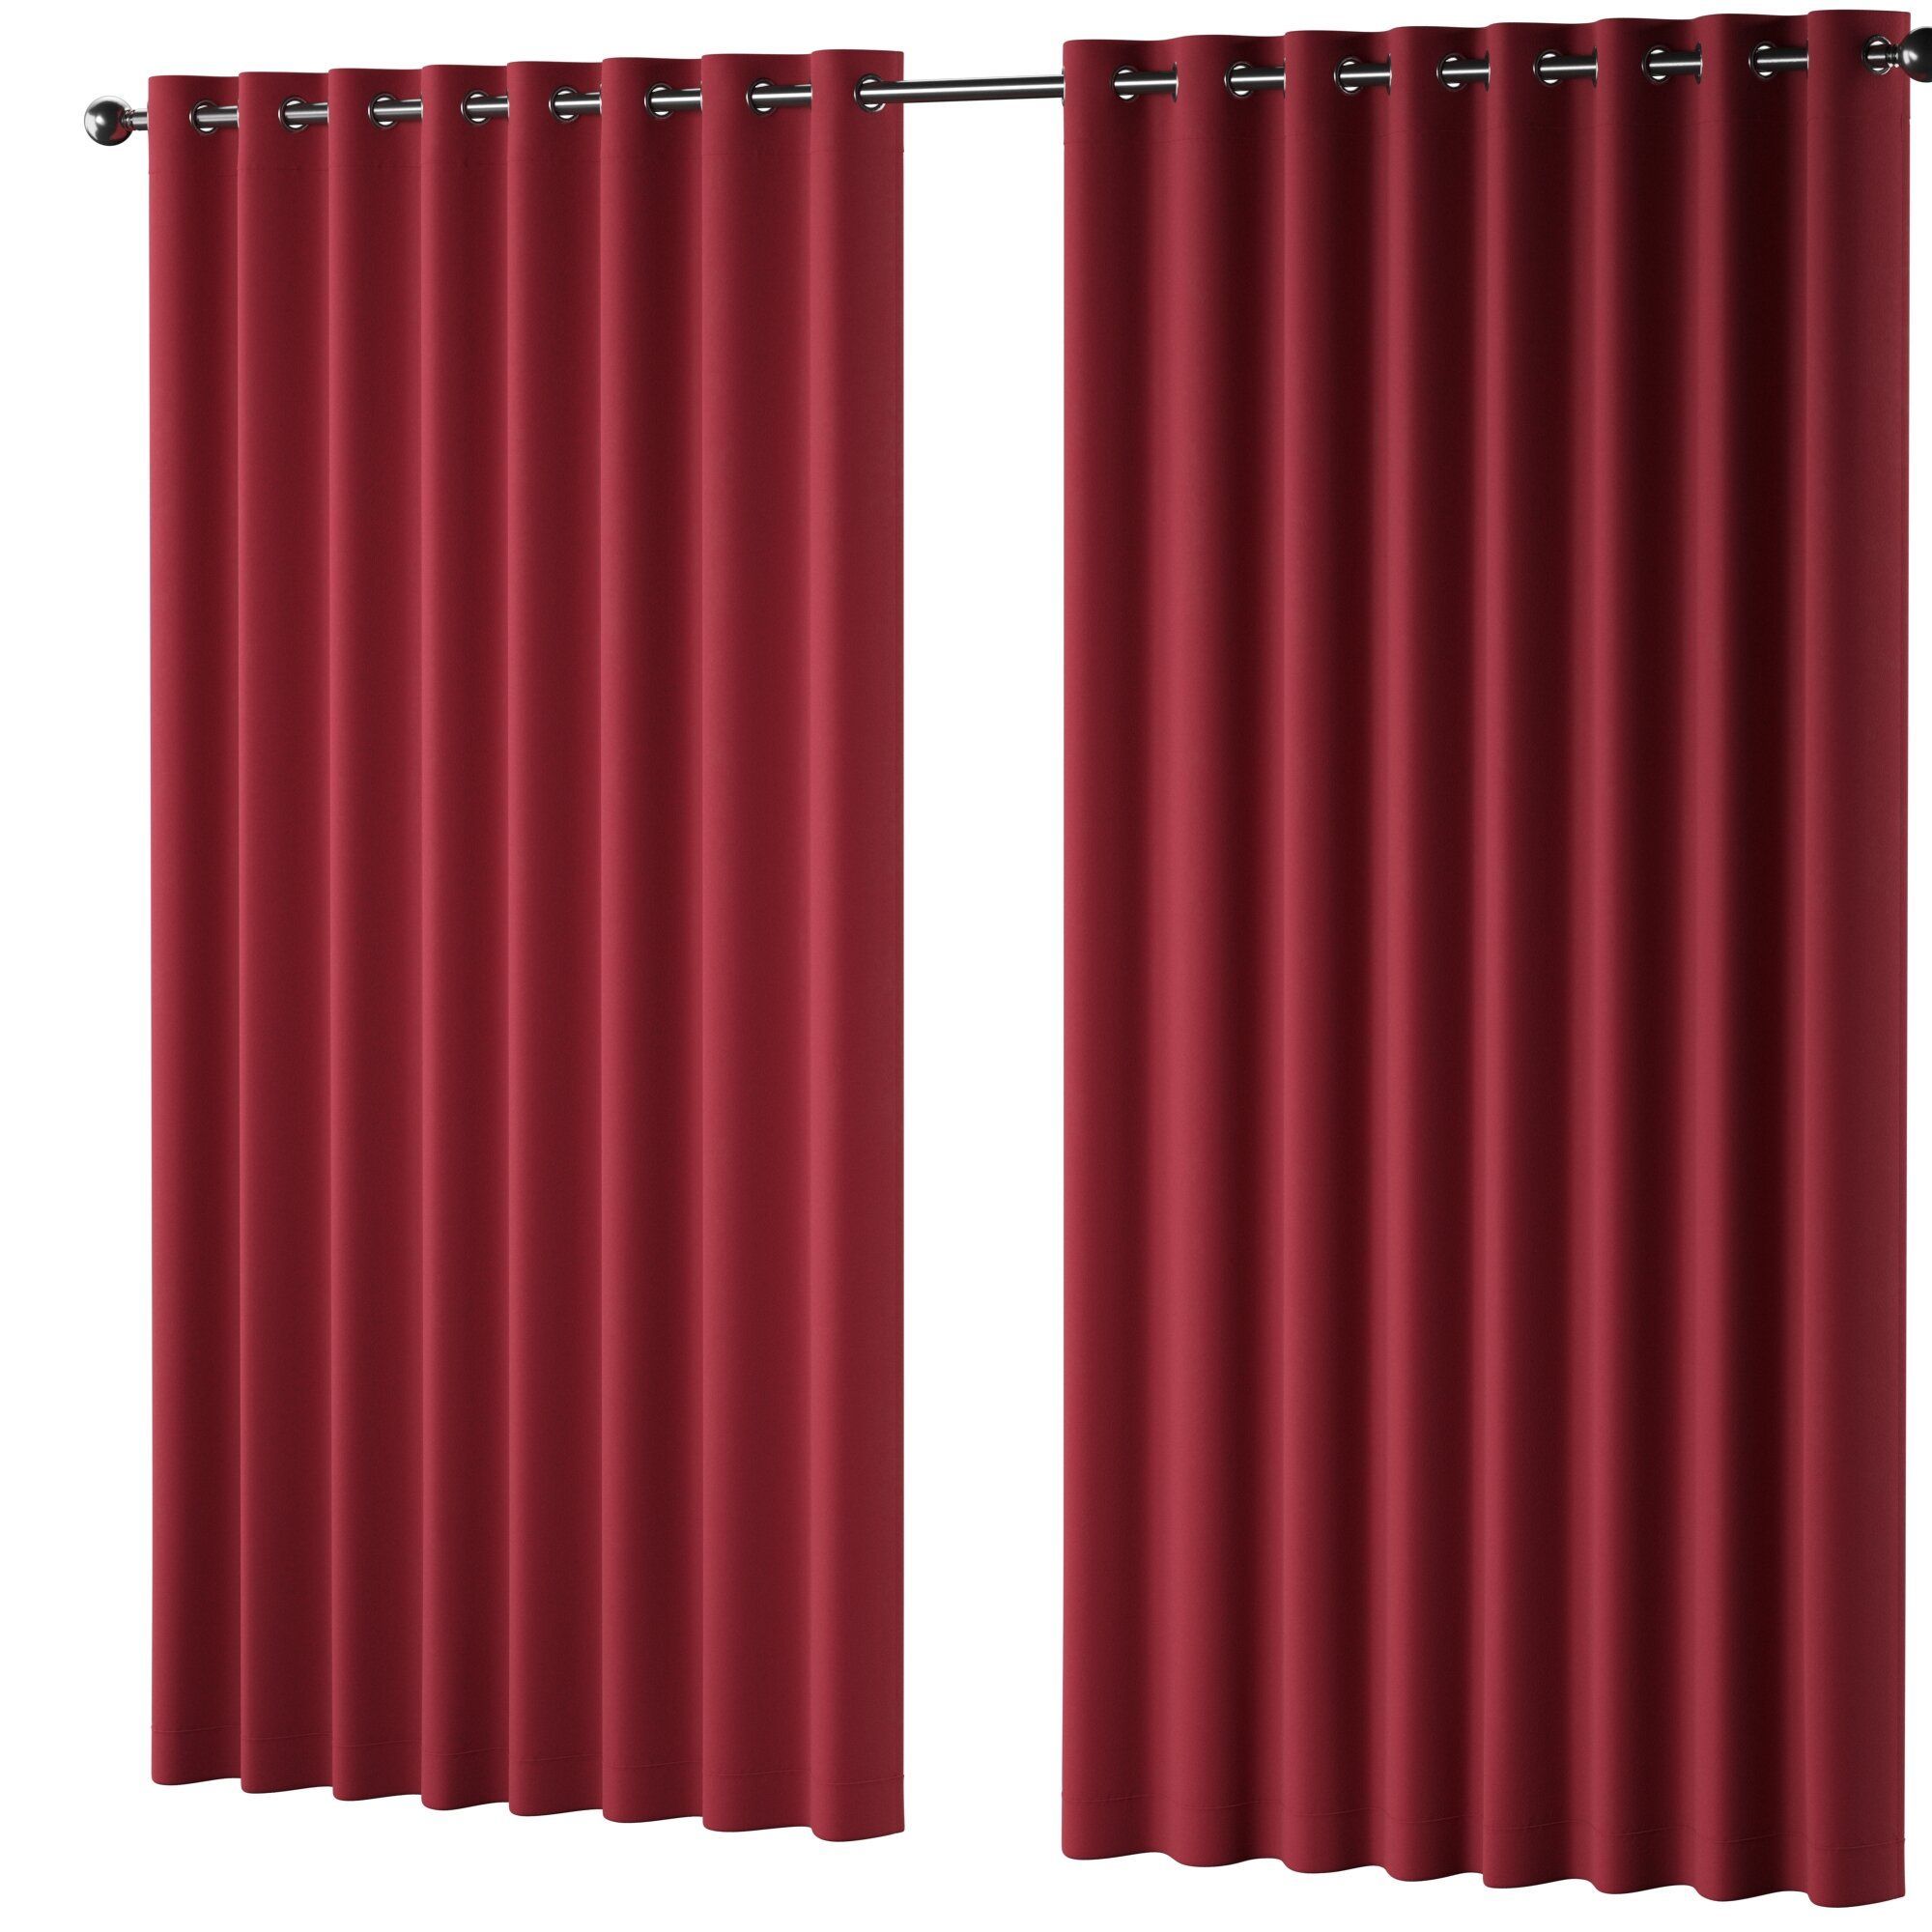 Wintergreen Sateen Solid Blackout Thermal Grommet Single Curtain Panel Regarding Tacoma Double Blackout Grommet Curtain Panels (View 22 of 30)